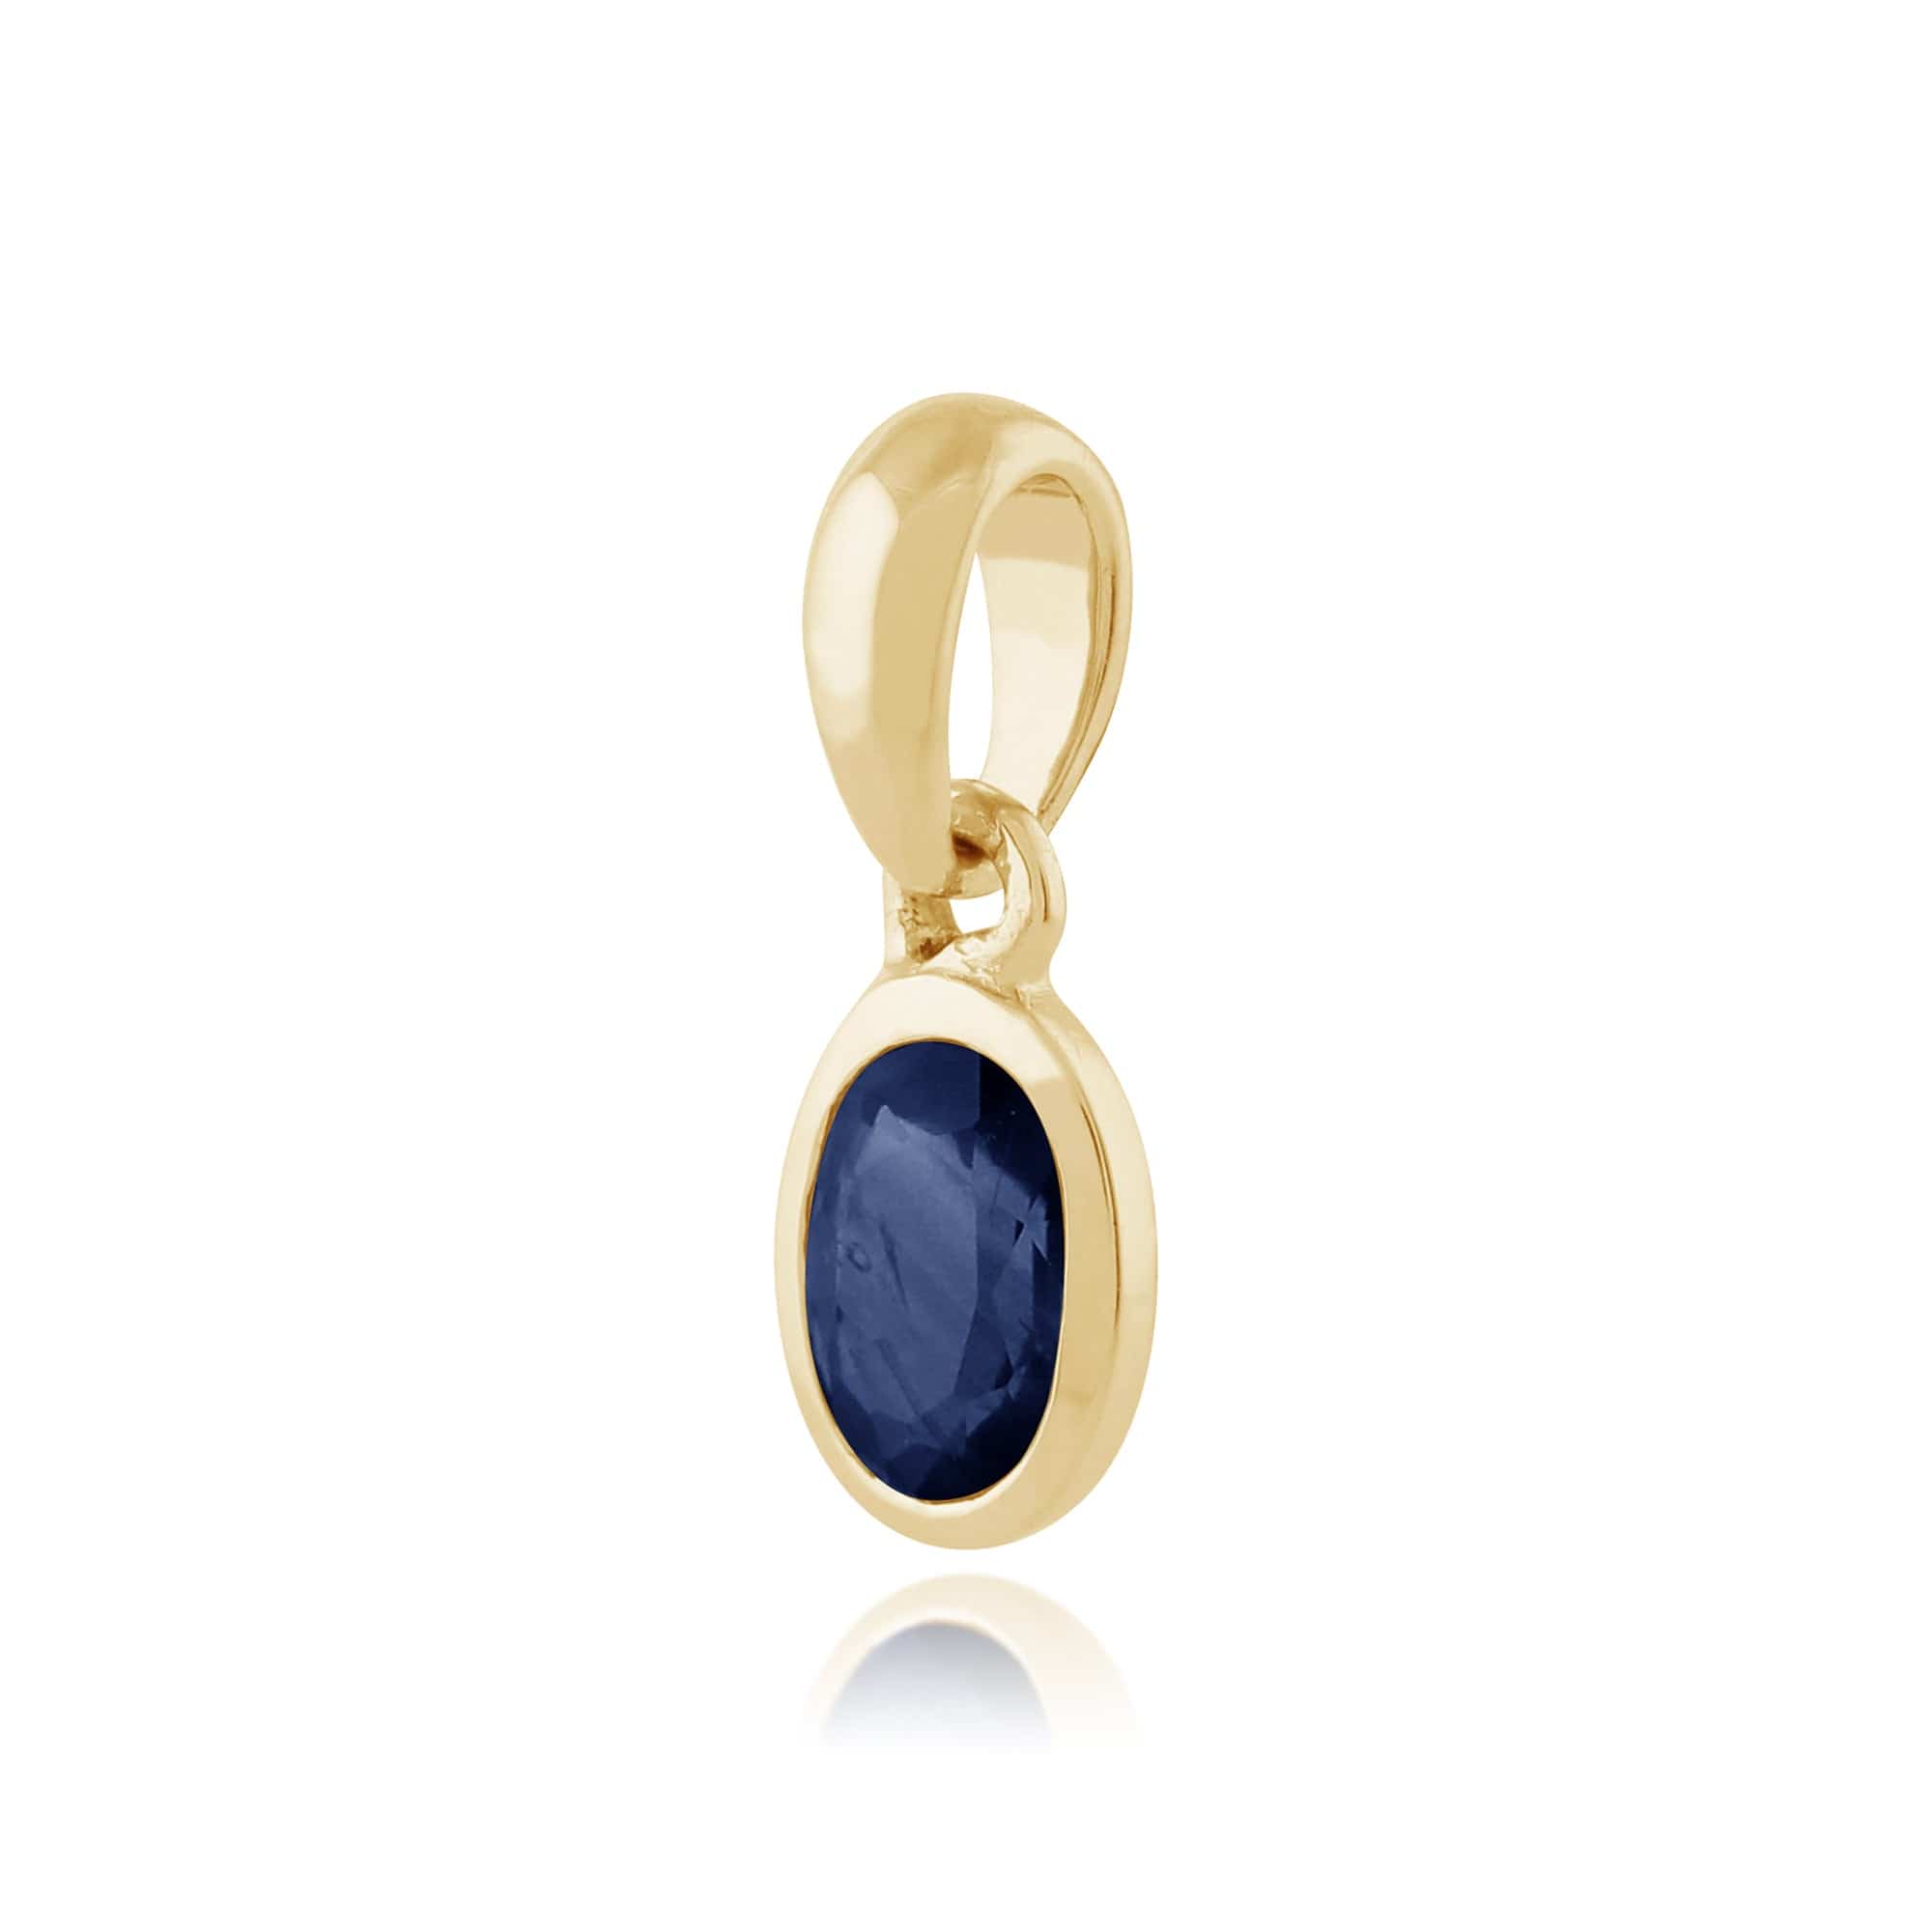 183P1120049 Classic Oval Light Blue Sapphire Pendant in 9ct Yellow Gold 2